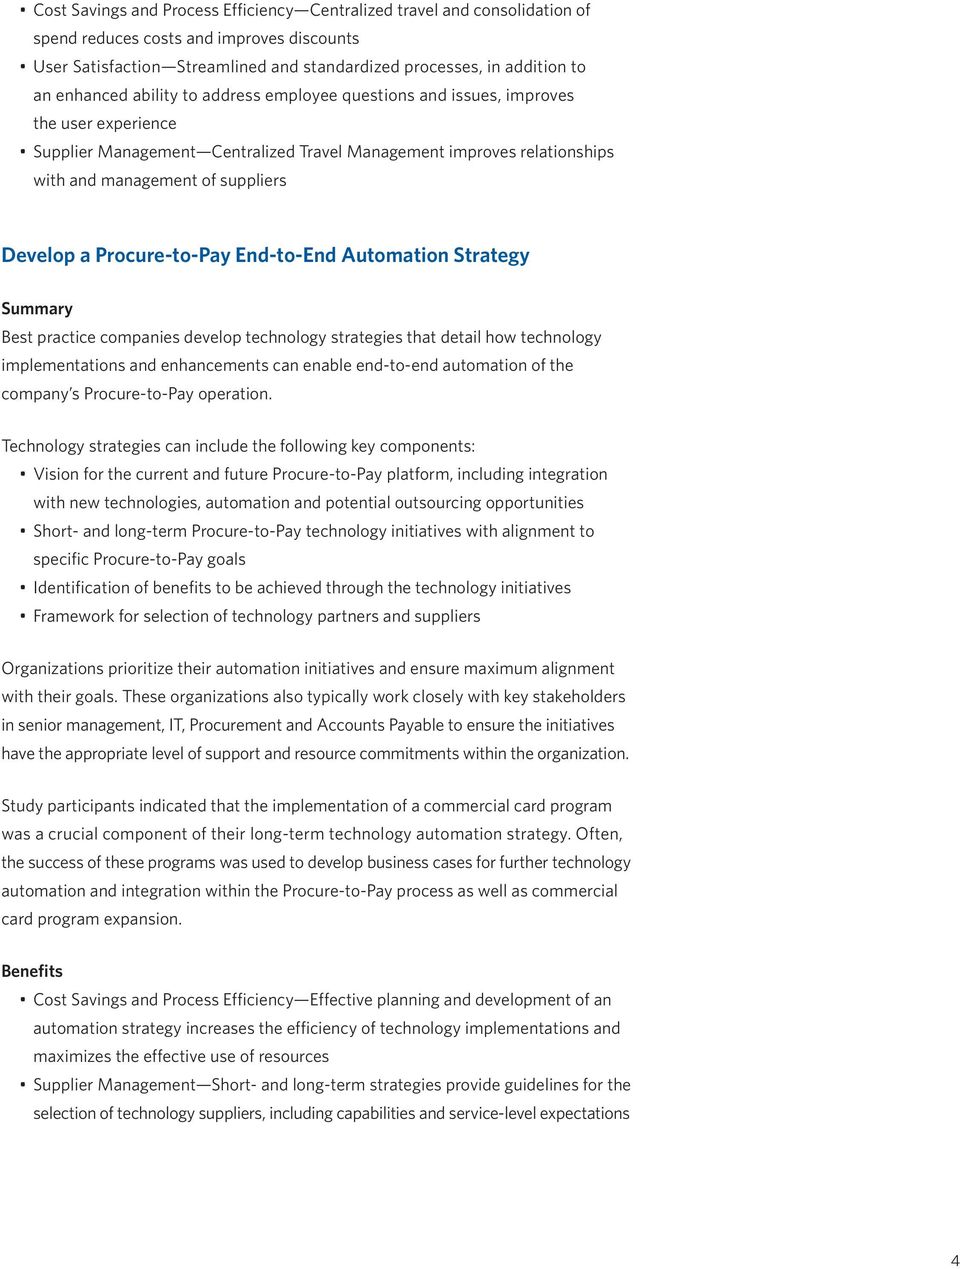 Develop a Procure-to-Pay End-to-End Automation Strategy Best practice companies develop technology strategies that detail how technology implementations and enhancements can enable end-to-end